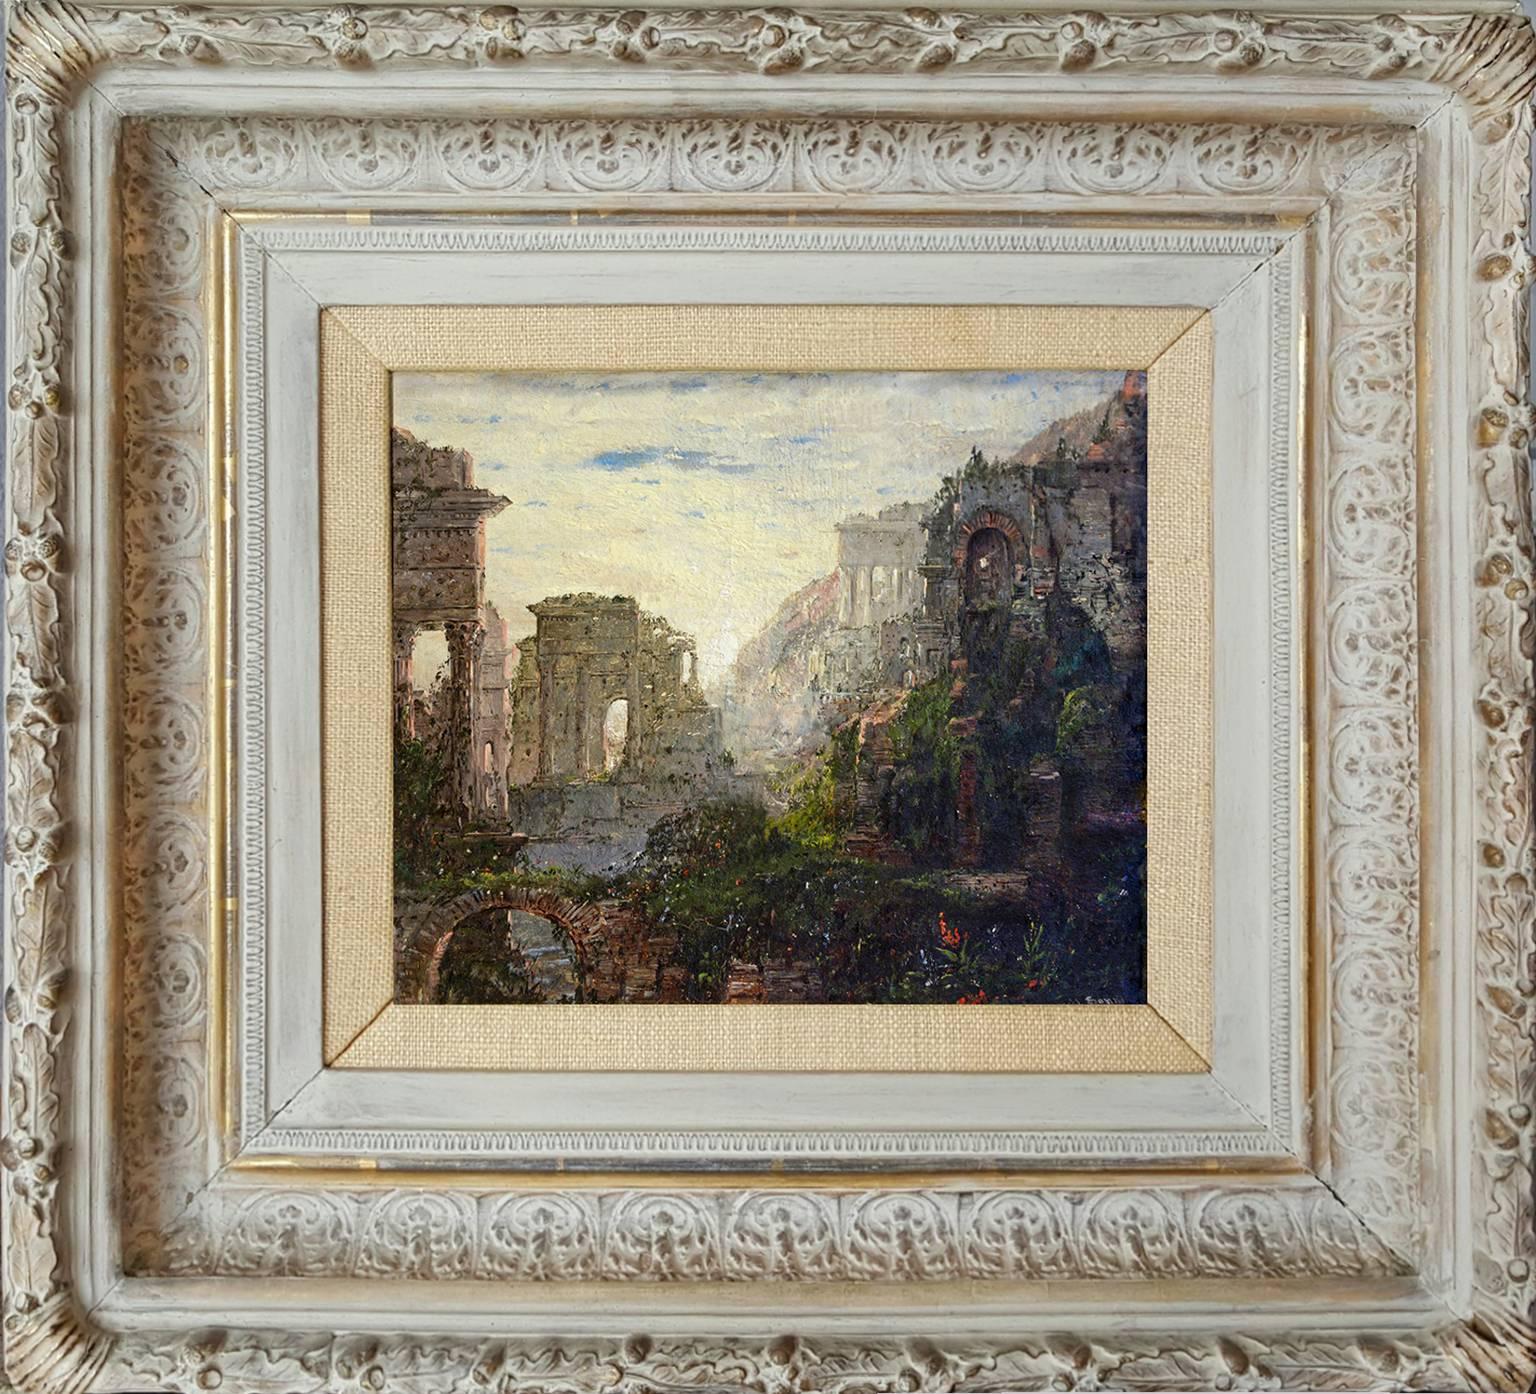 Classical Ruins - Painting by William Louis Sonntag Sr.